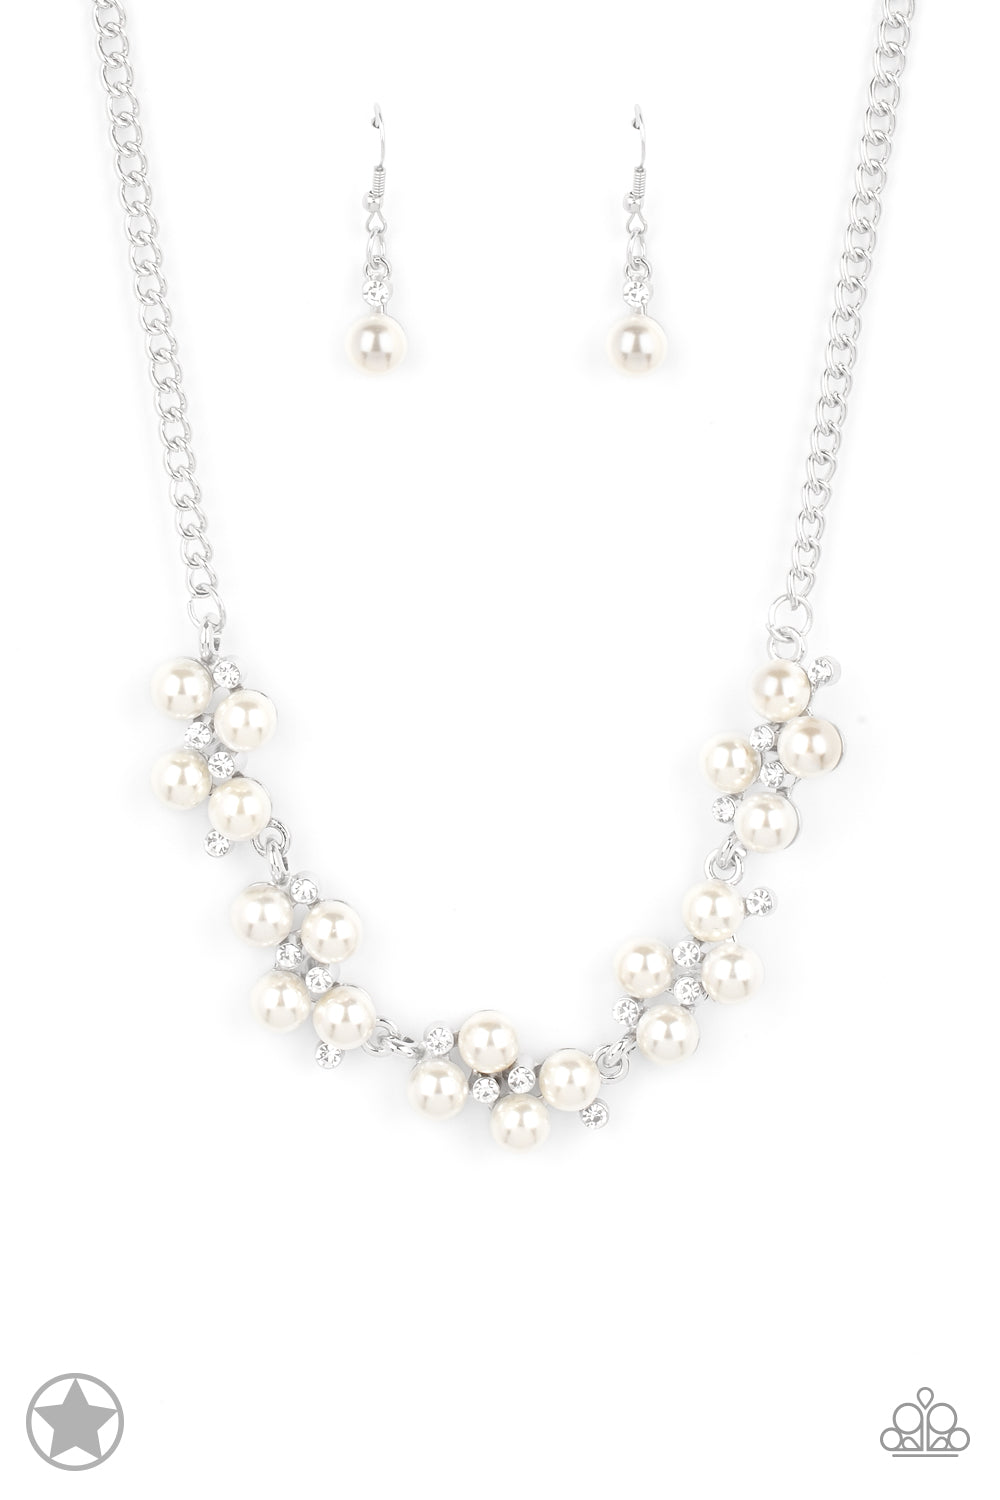 Dainty clusters of shimmery white pearls are dusted with sparkling rhinestones, creating a romantic, timeless design. Features an adjustable clasp closure.  Sold as one individual necklace. Includes one pair of matching earrings.   Get The Complete Look! Bracelet: 